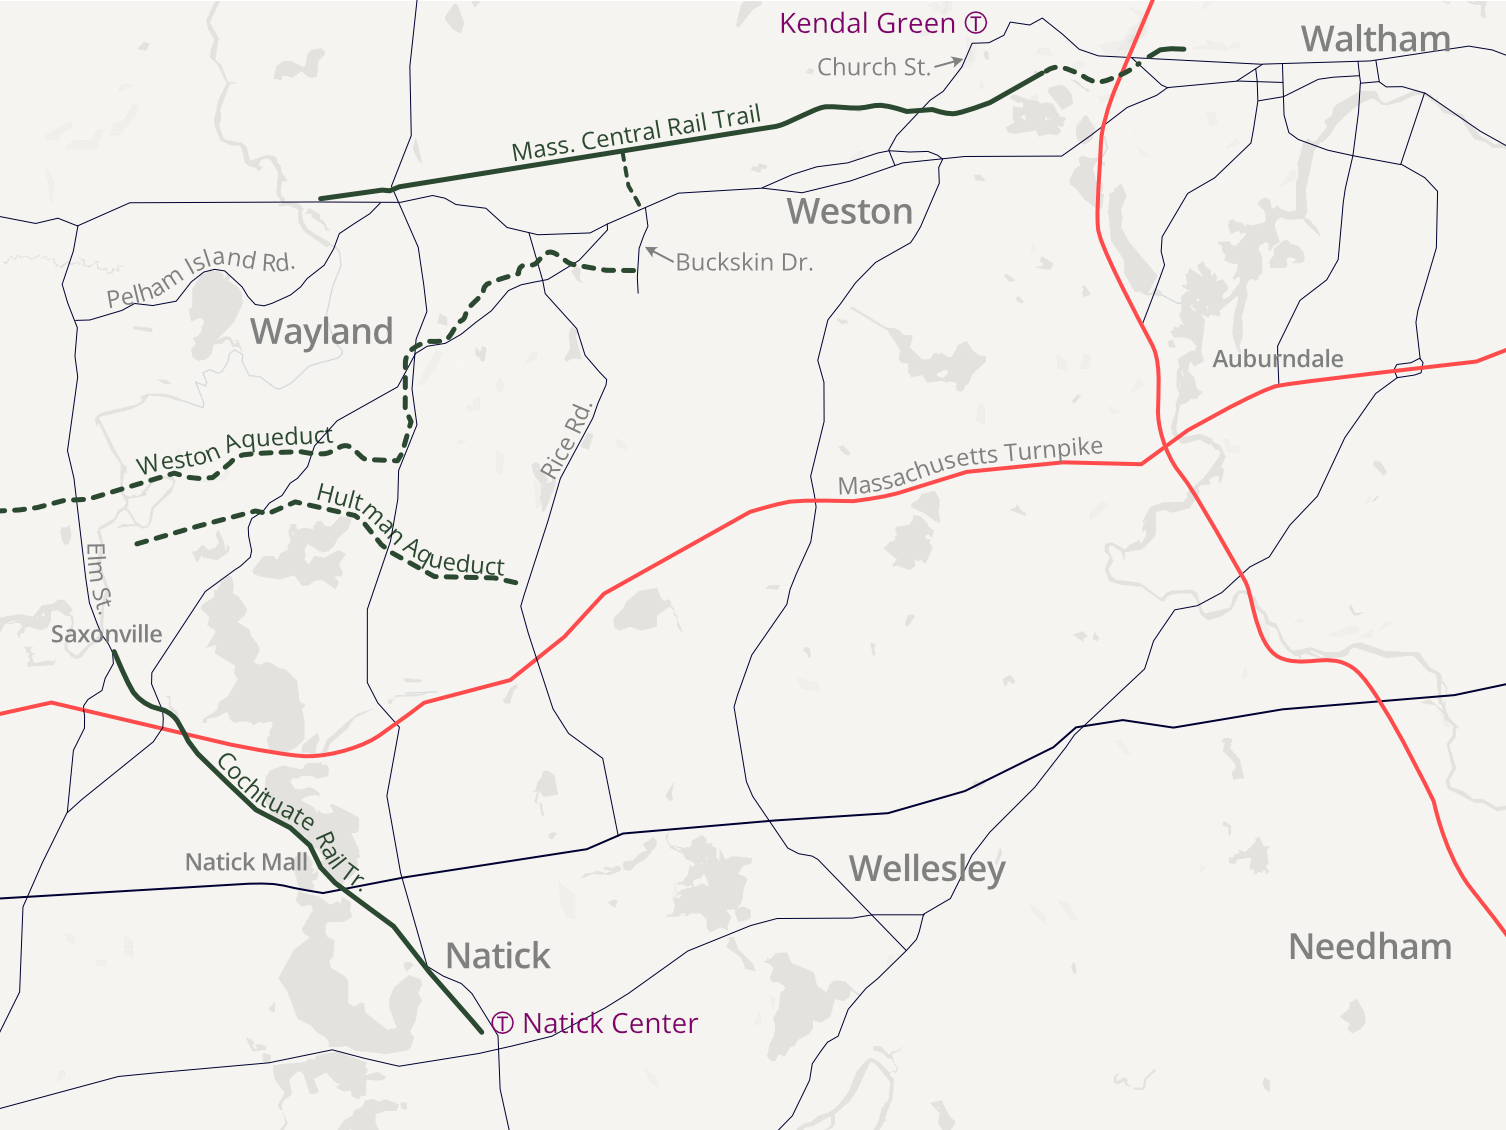 An overview map of the Mass. Central Rail Trail, Cochituate Rail Trail, and aqueduct trails in Wayland, Natick, Framingham, and Weston.